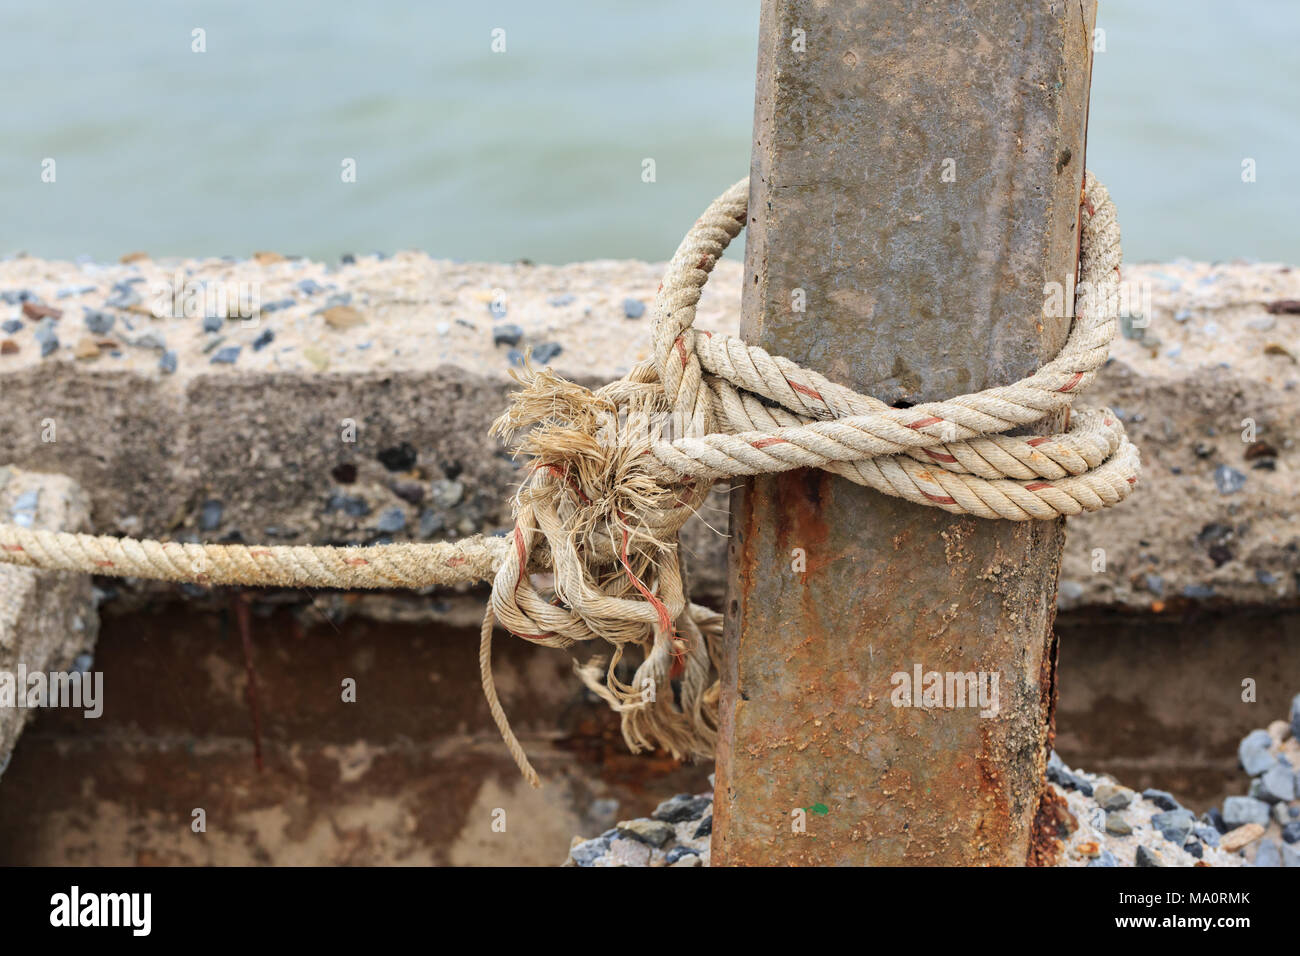 https://c8.alamy.com/comp/MA0RMK/old-fishing-boat-rope-with-a-tied-knot-around-the-old-concrete-post-MA0RMK.jpg